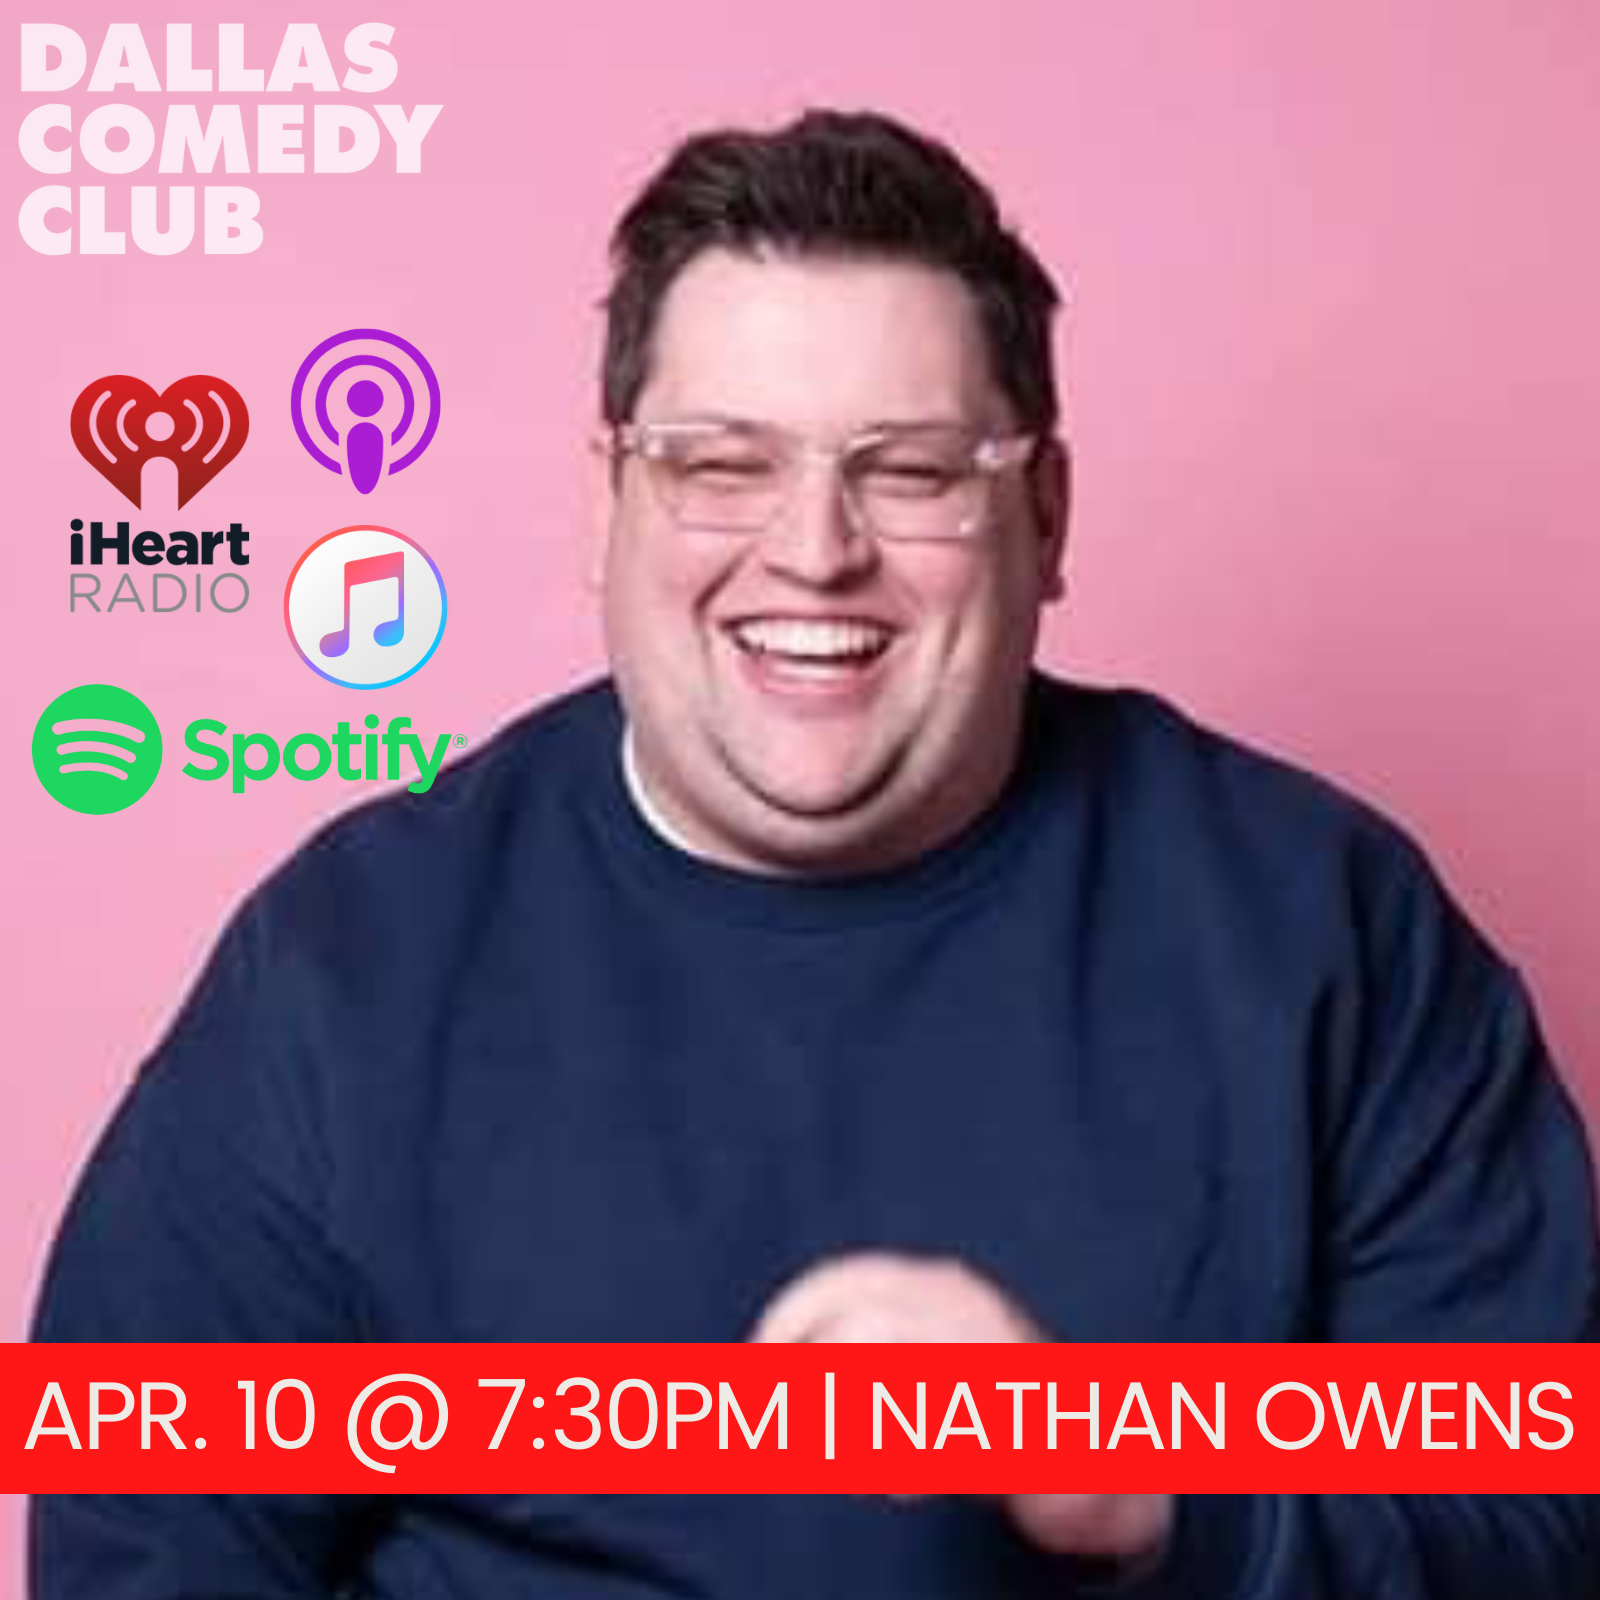 Nathan Owens with credits